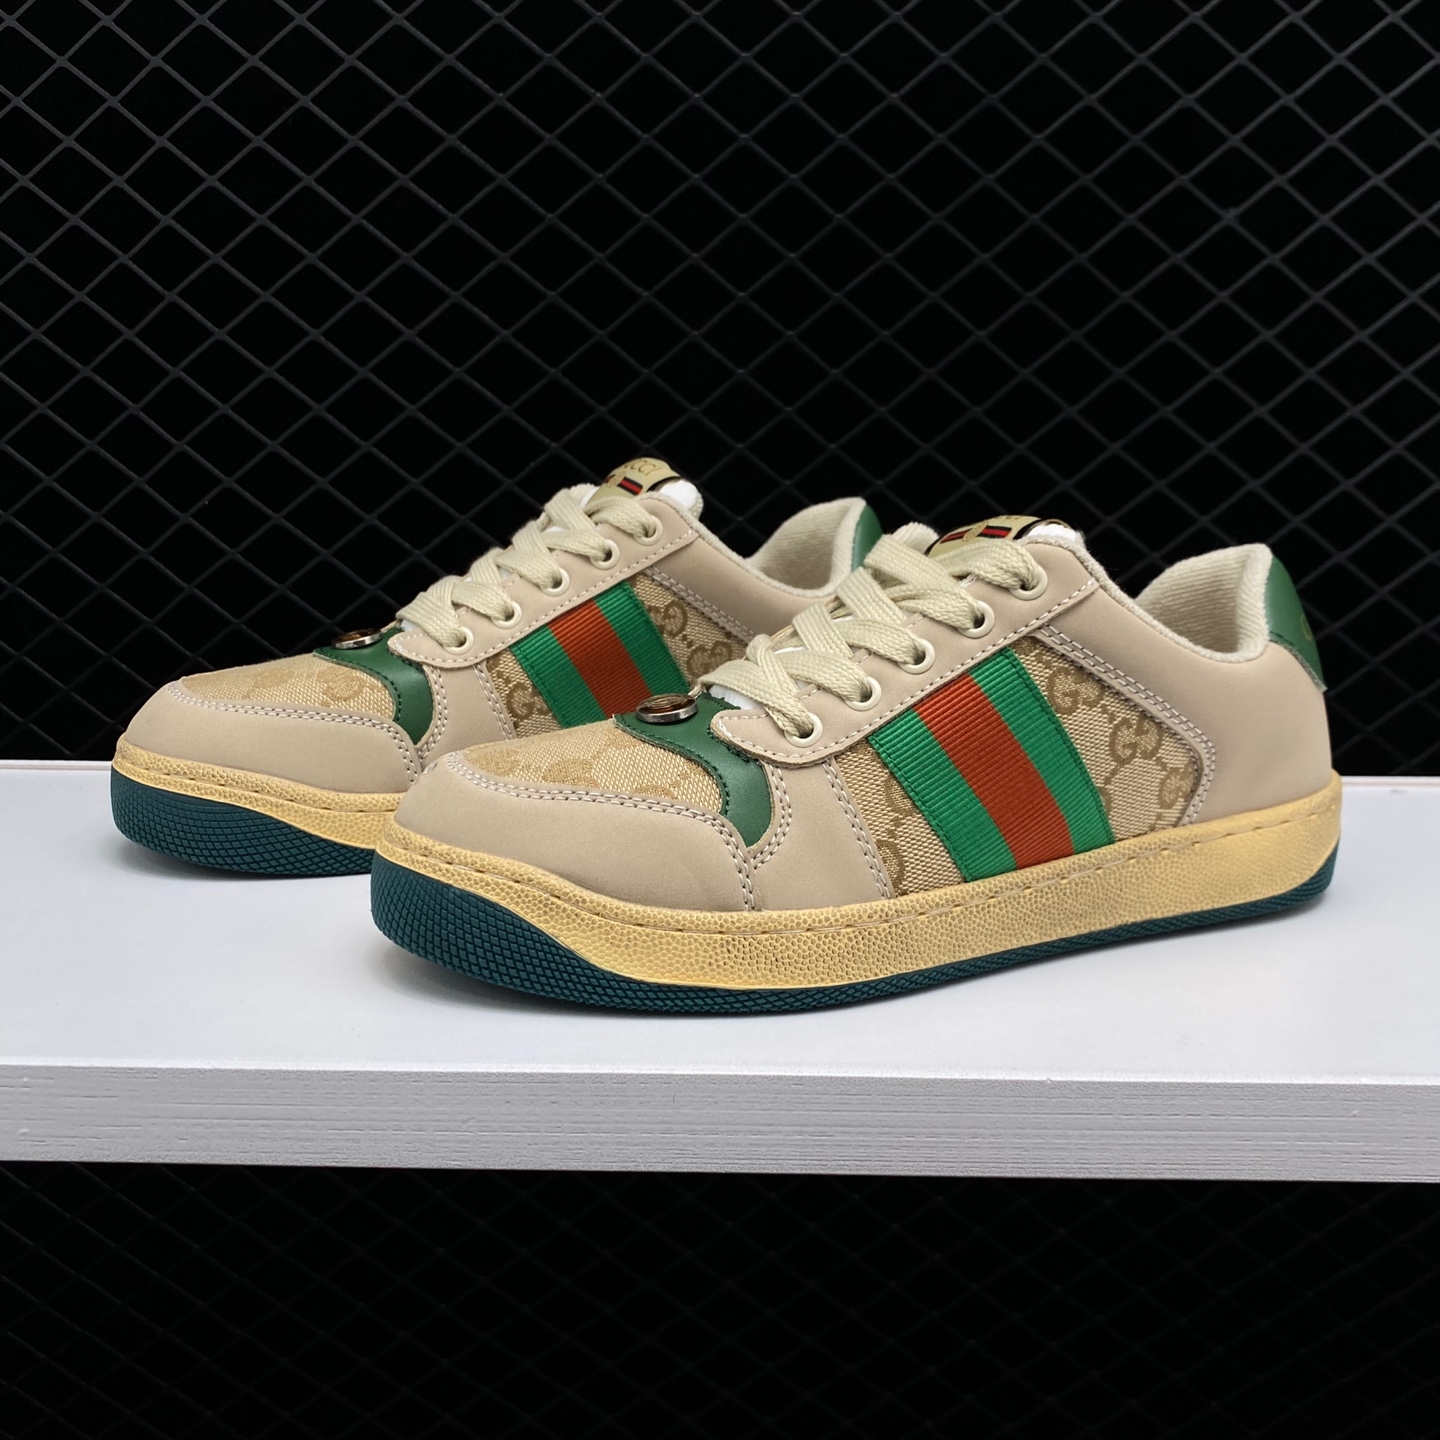 Gucci Screener Butter Leather Green 570443 9Y920 - Authentic Luxury Sneakers